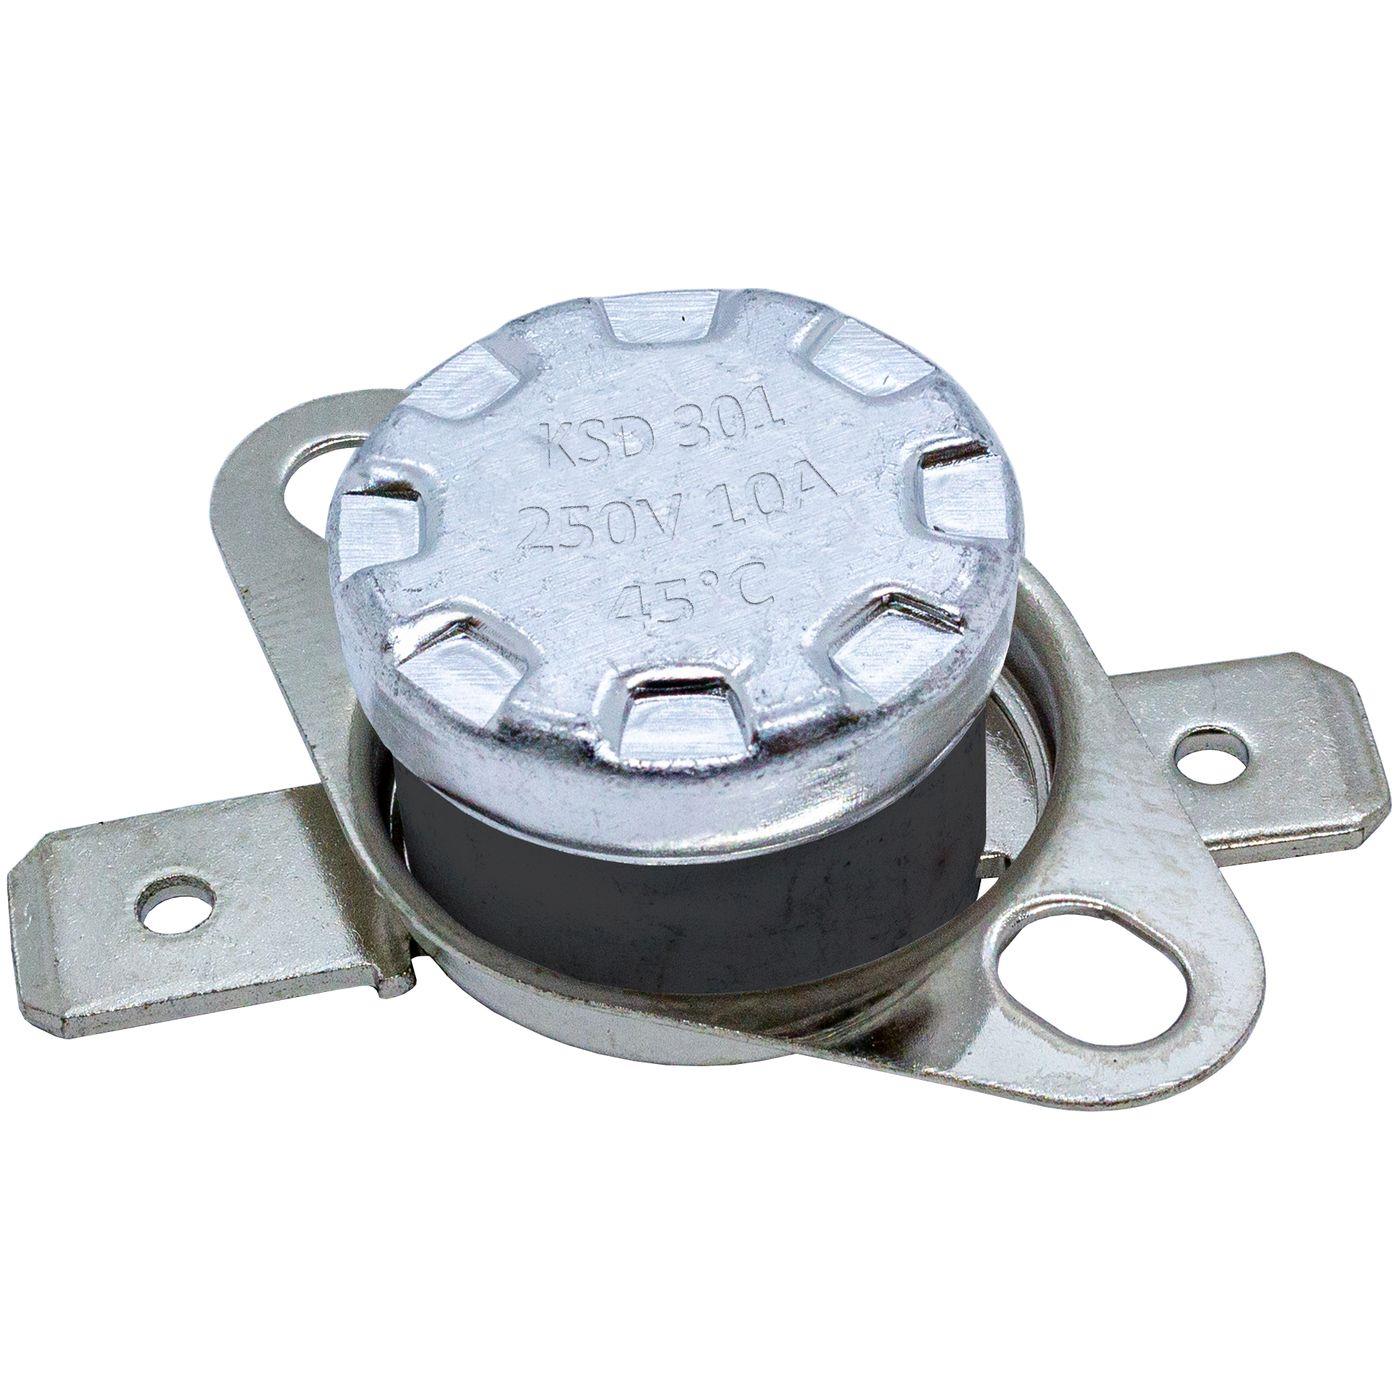 Thermal switch 45°C NC contact 250V 10A Temperature switch thermostat KSD301 Bimetal Thermal protection